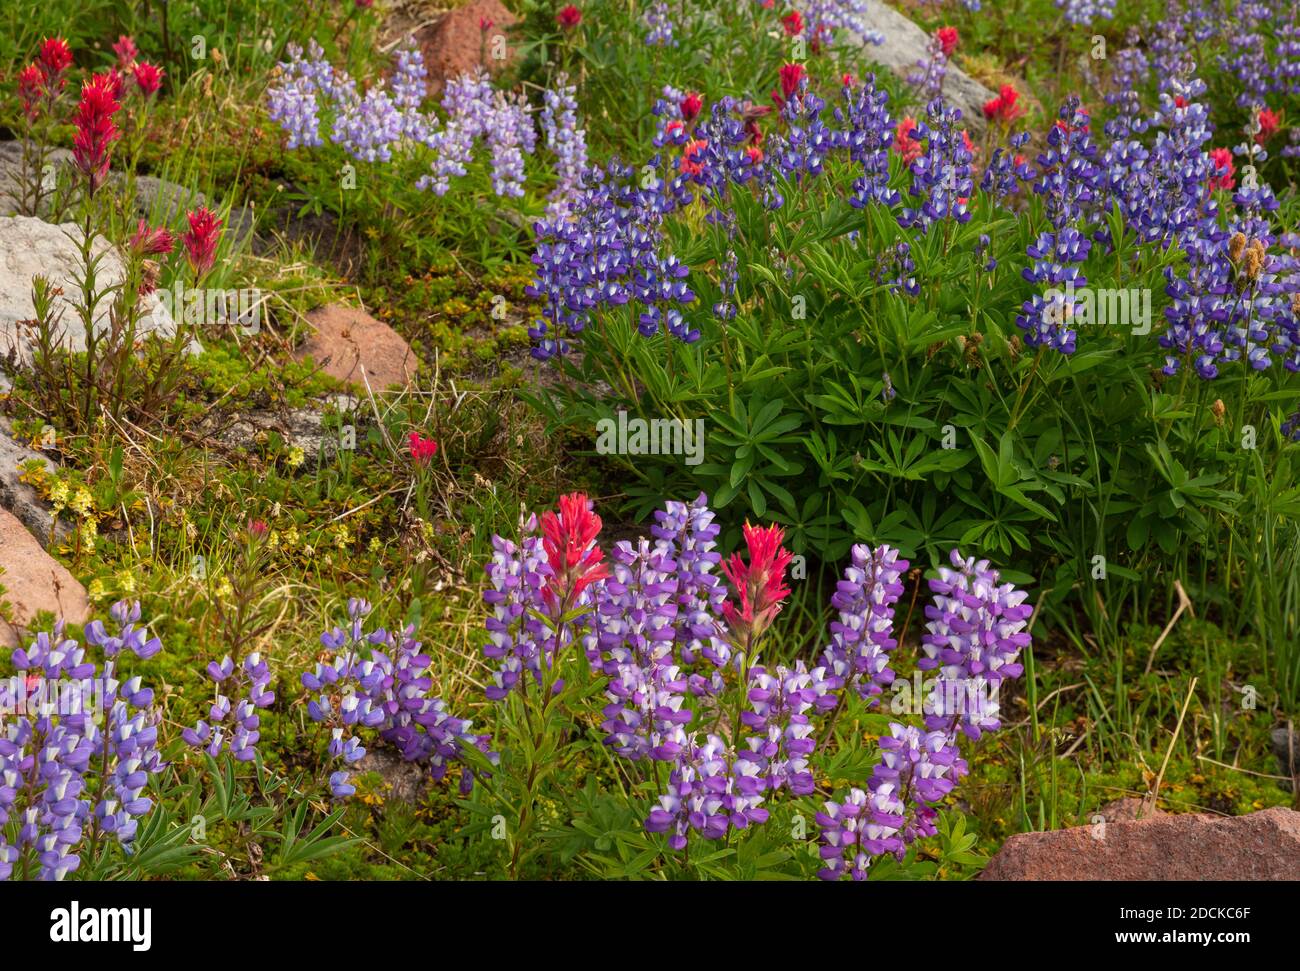 WA18367-00...WASHINGTON - Paintbrush and lupine blooming along the Pacific Crest Trail in the Mount Adams Wilderness area. Stock Photo